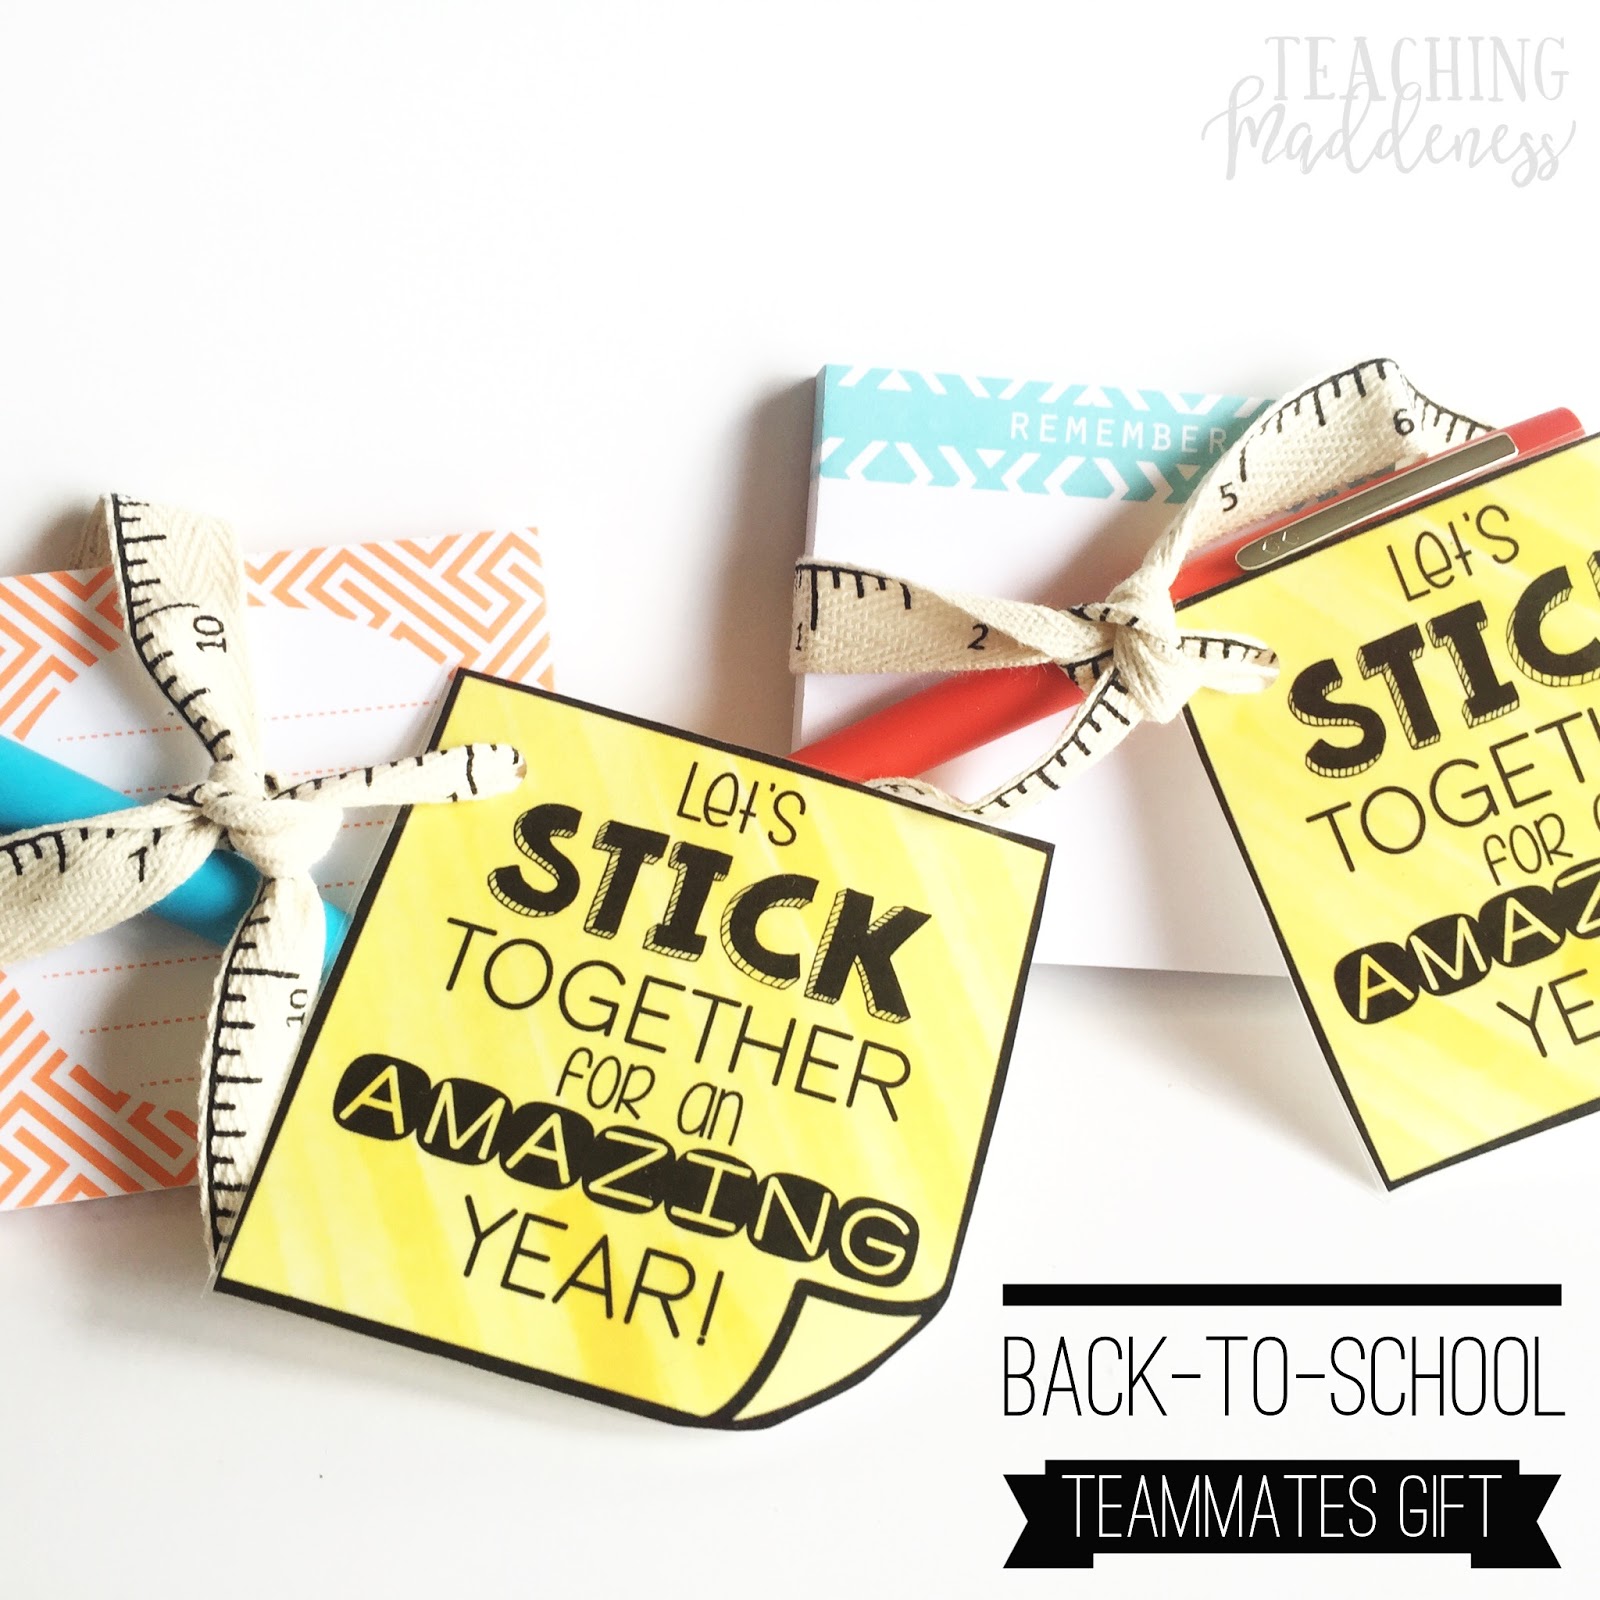 Teammate Back To School Gift Tag by Teaching The Tinies